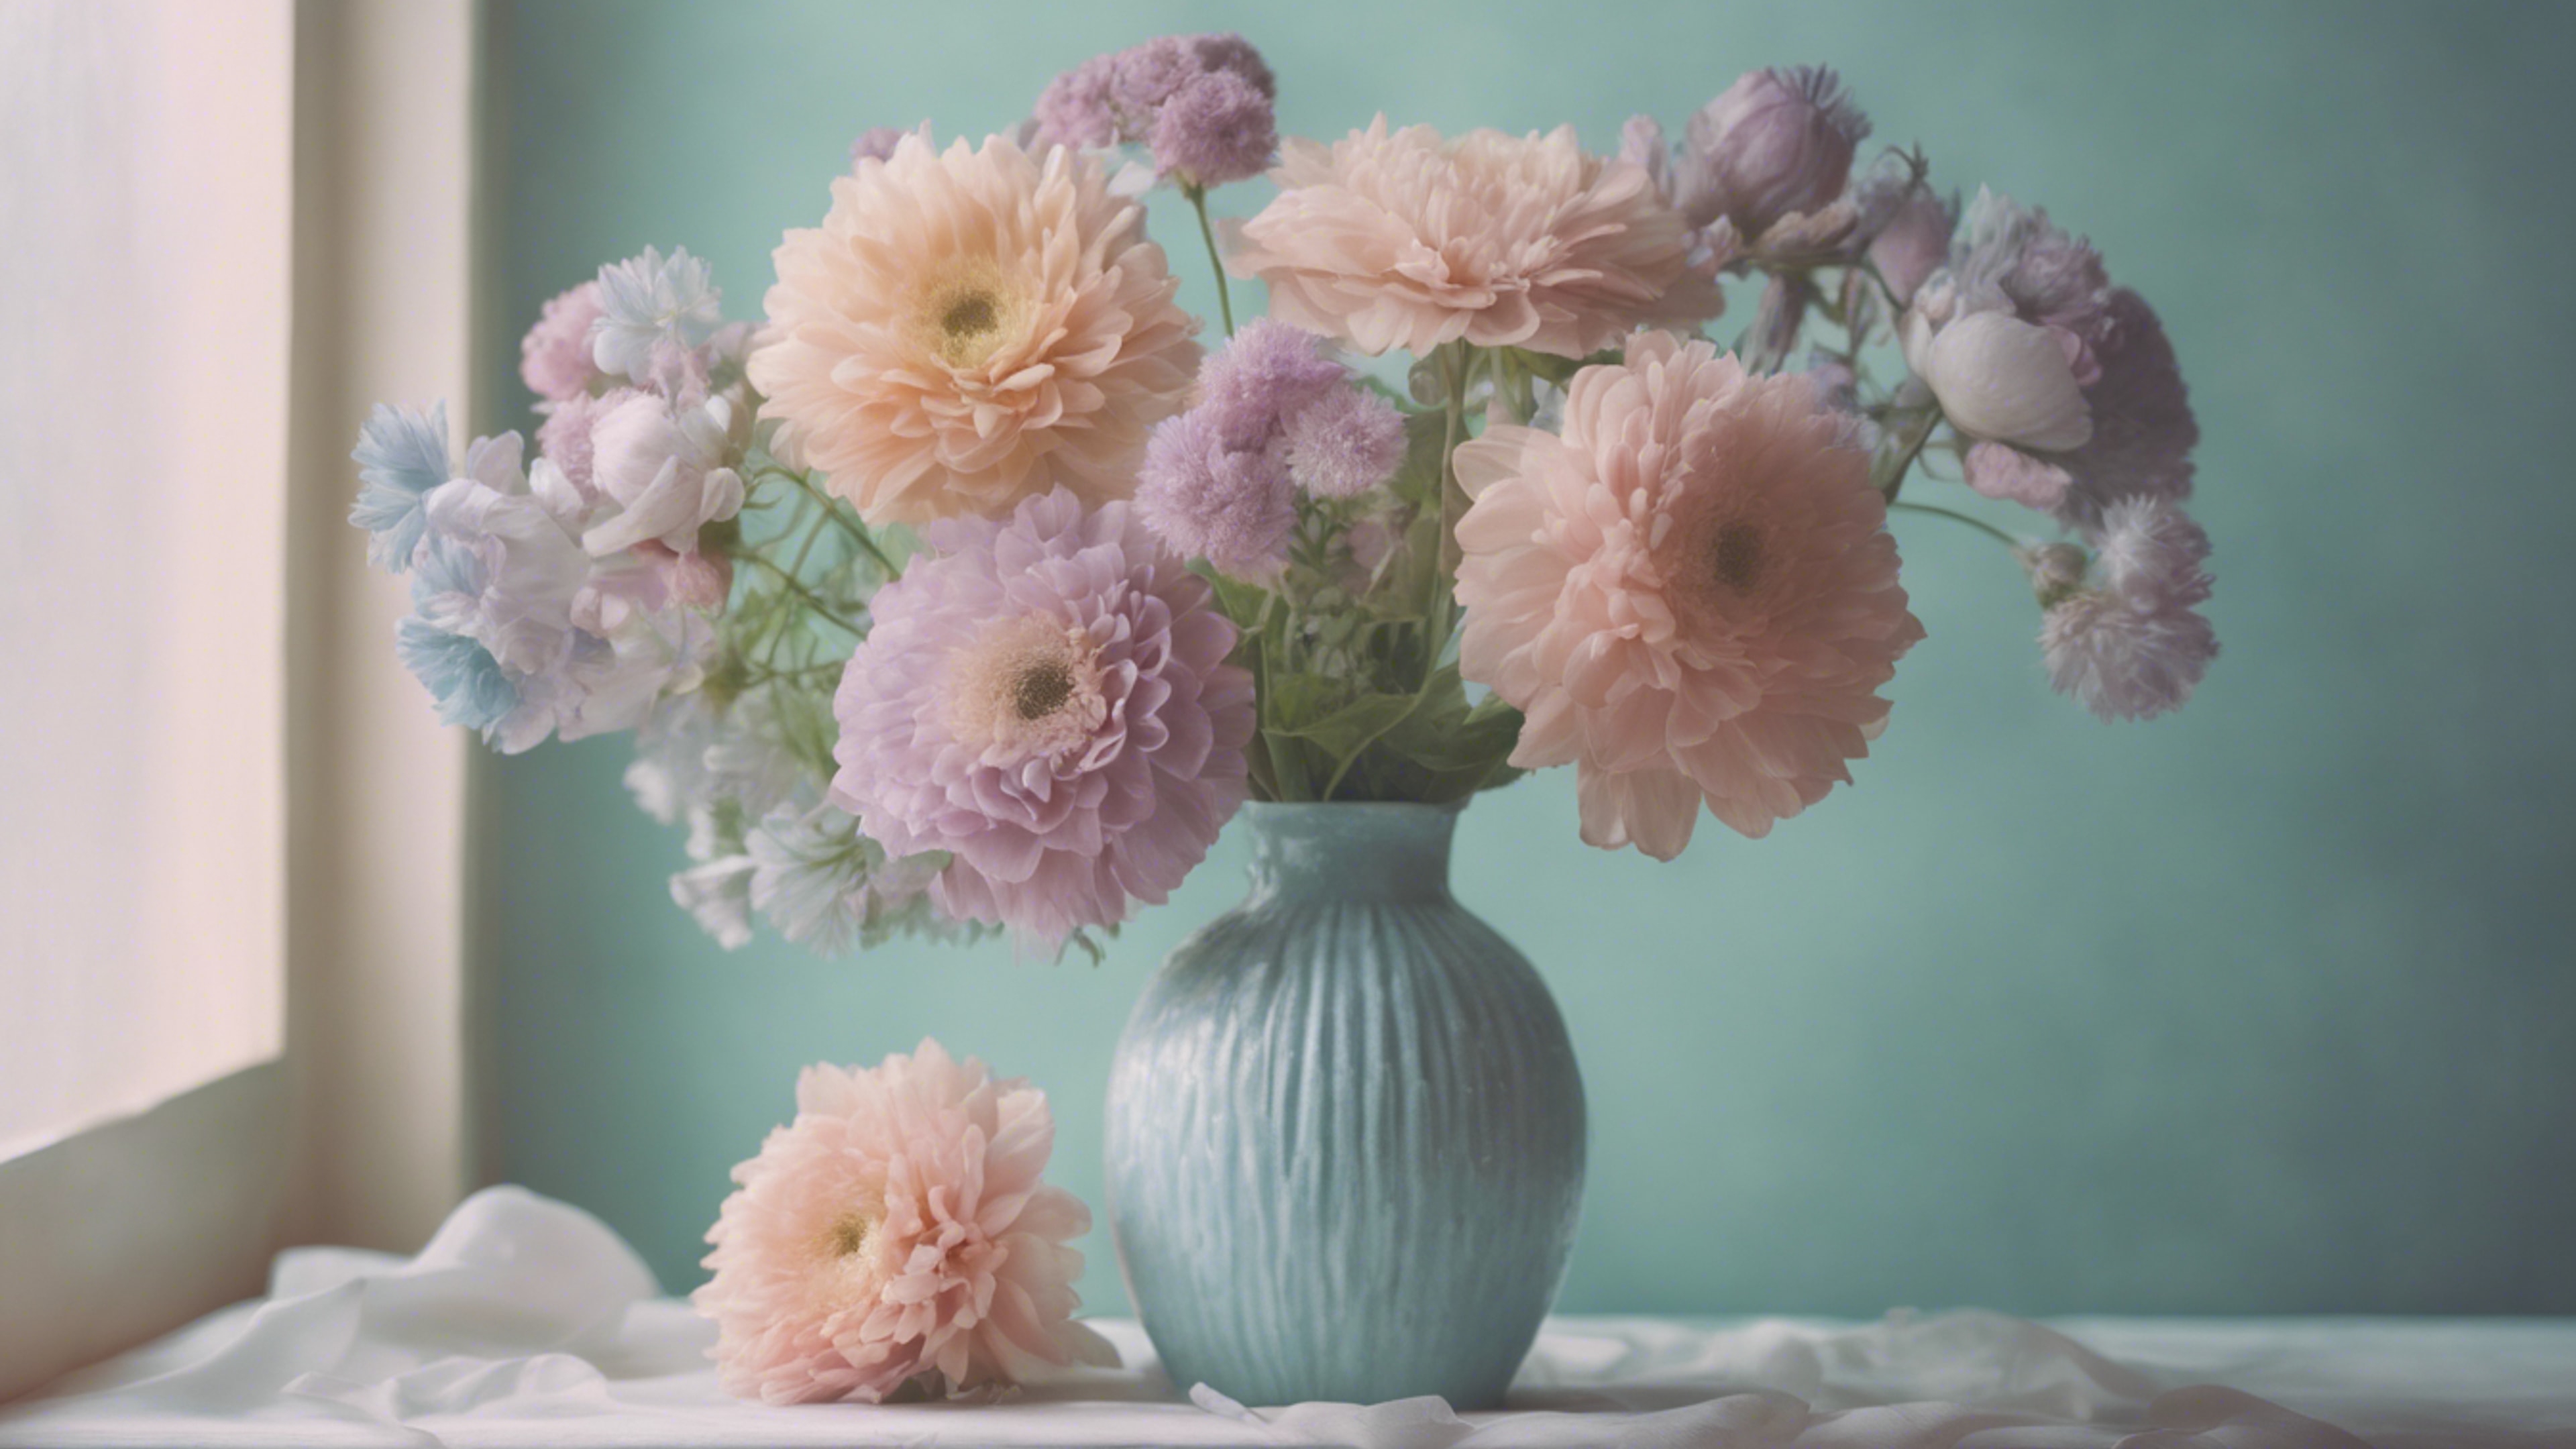 A pastel toned still-life painting featuring cool pastel colored flowers in a vase. Hintergrund[6e1327f815a34bc2b32b]